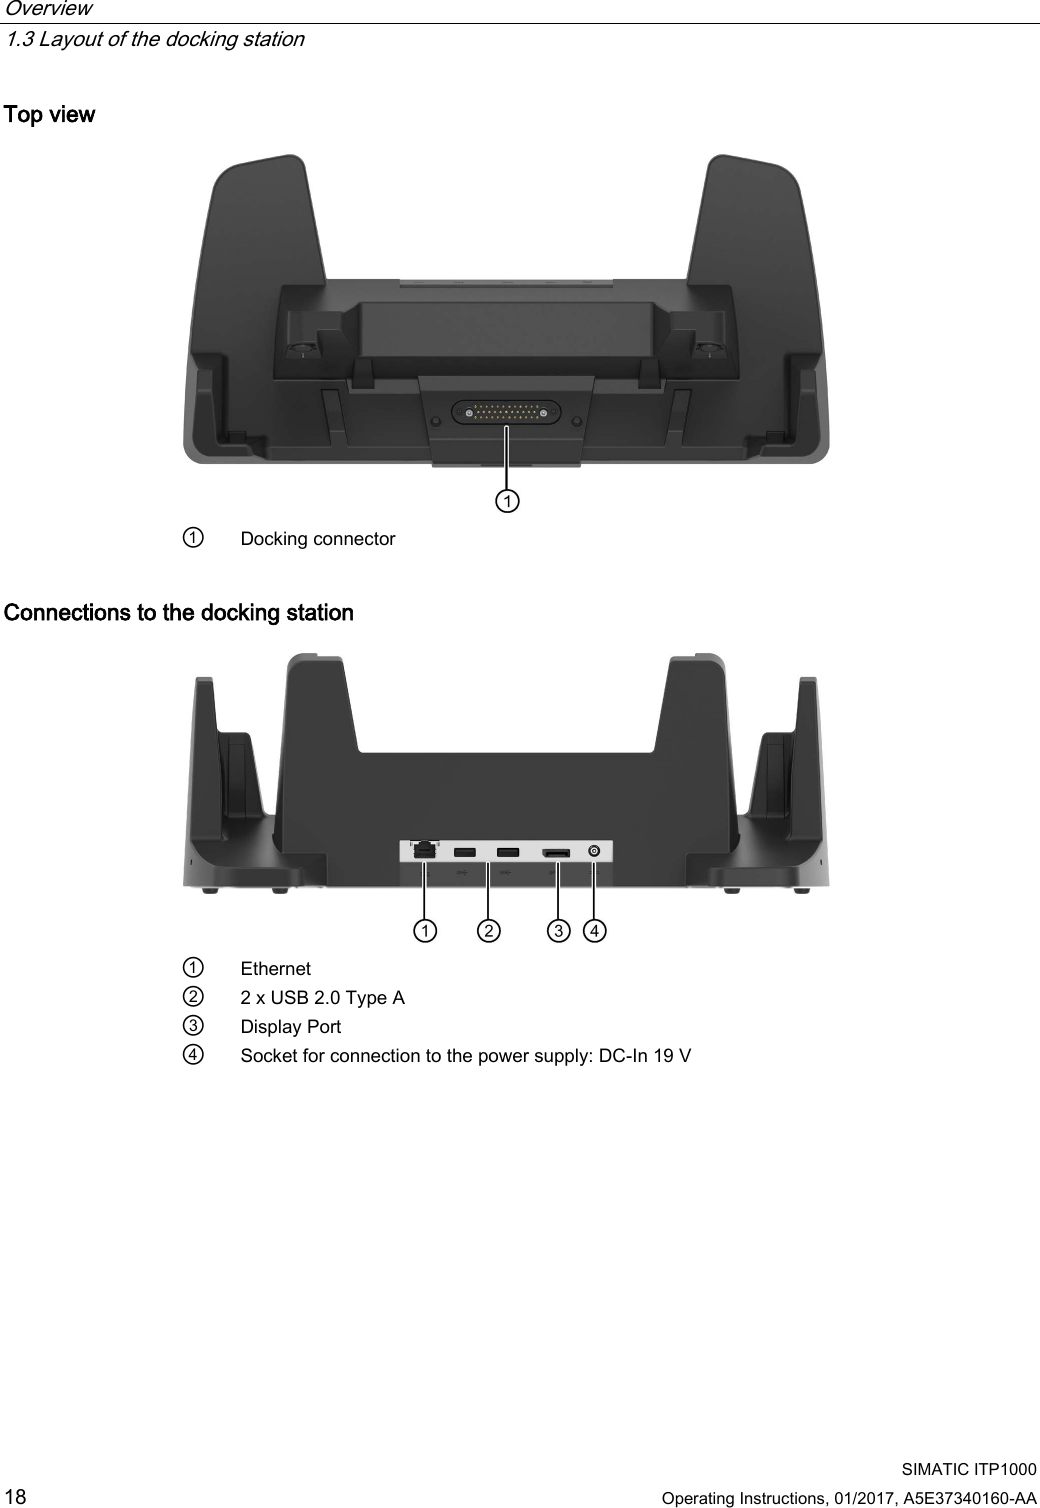 Overview   1.3 Layout of the docking station   SIMATIC ITP1000 18  Operating Instructions, 01/2017, A5E37340160-AA  Top view  ① Docking connector Connections to the docking station   ① Ethernet  ② 2 x USB 2.0 Type A  ③ Display Port ④ Socket for connection to the power supply: DC-In 19 V   